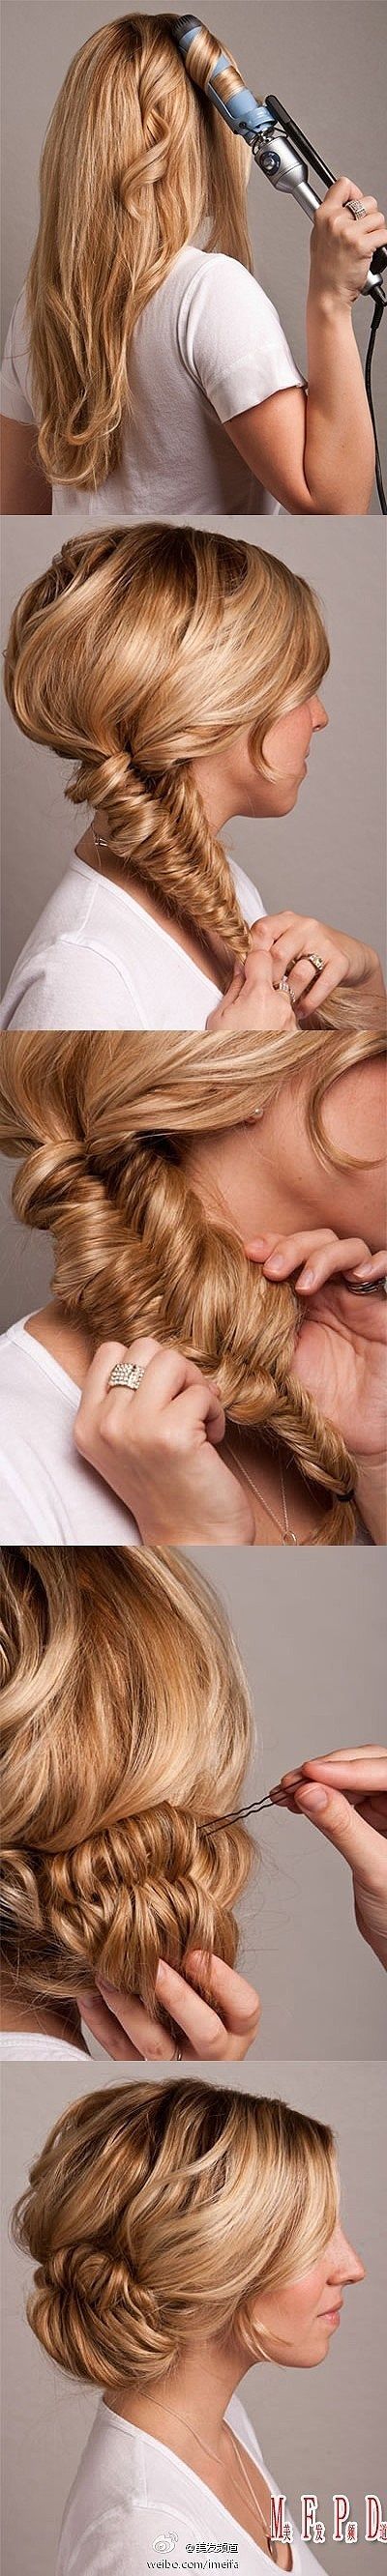 Fishtail updo- I want to do this when my hair is long enough again.